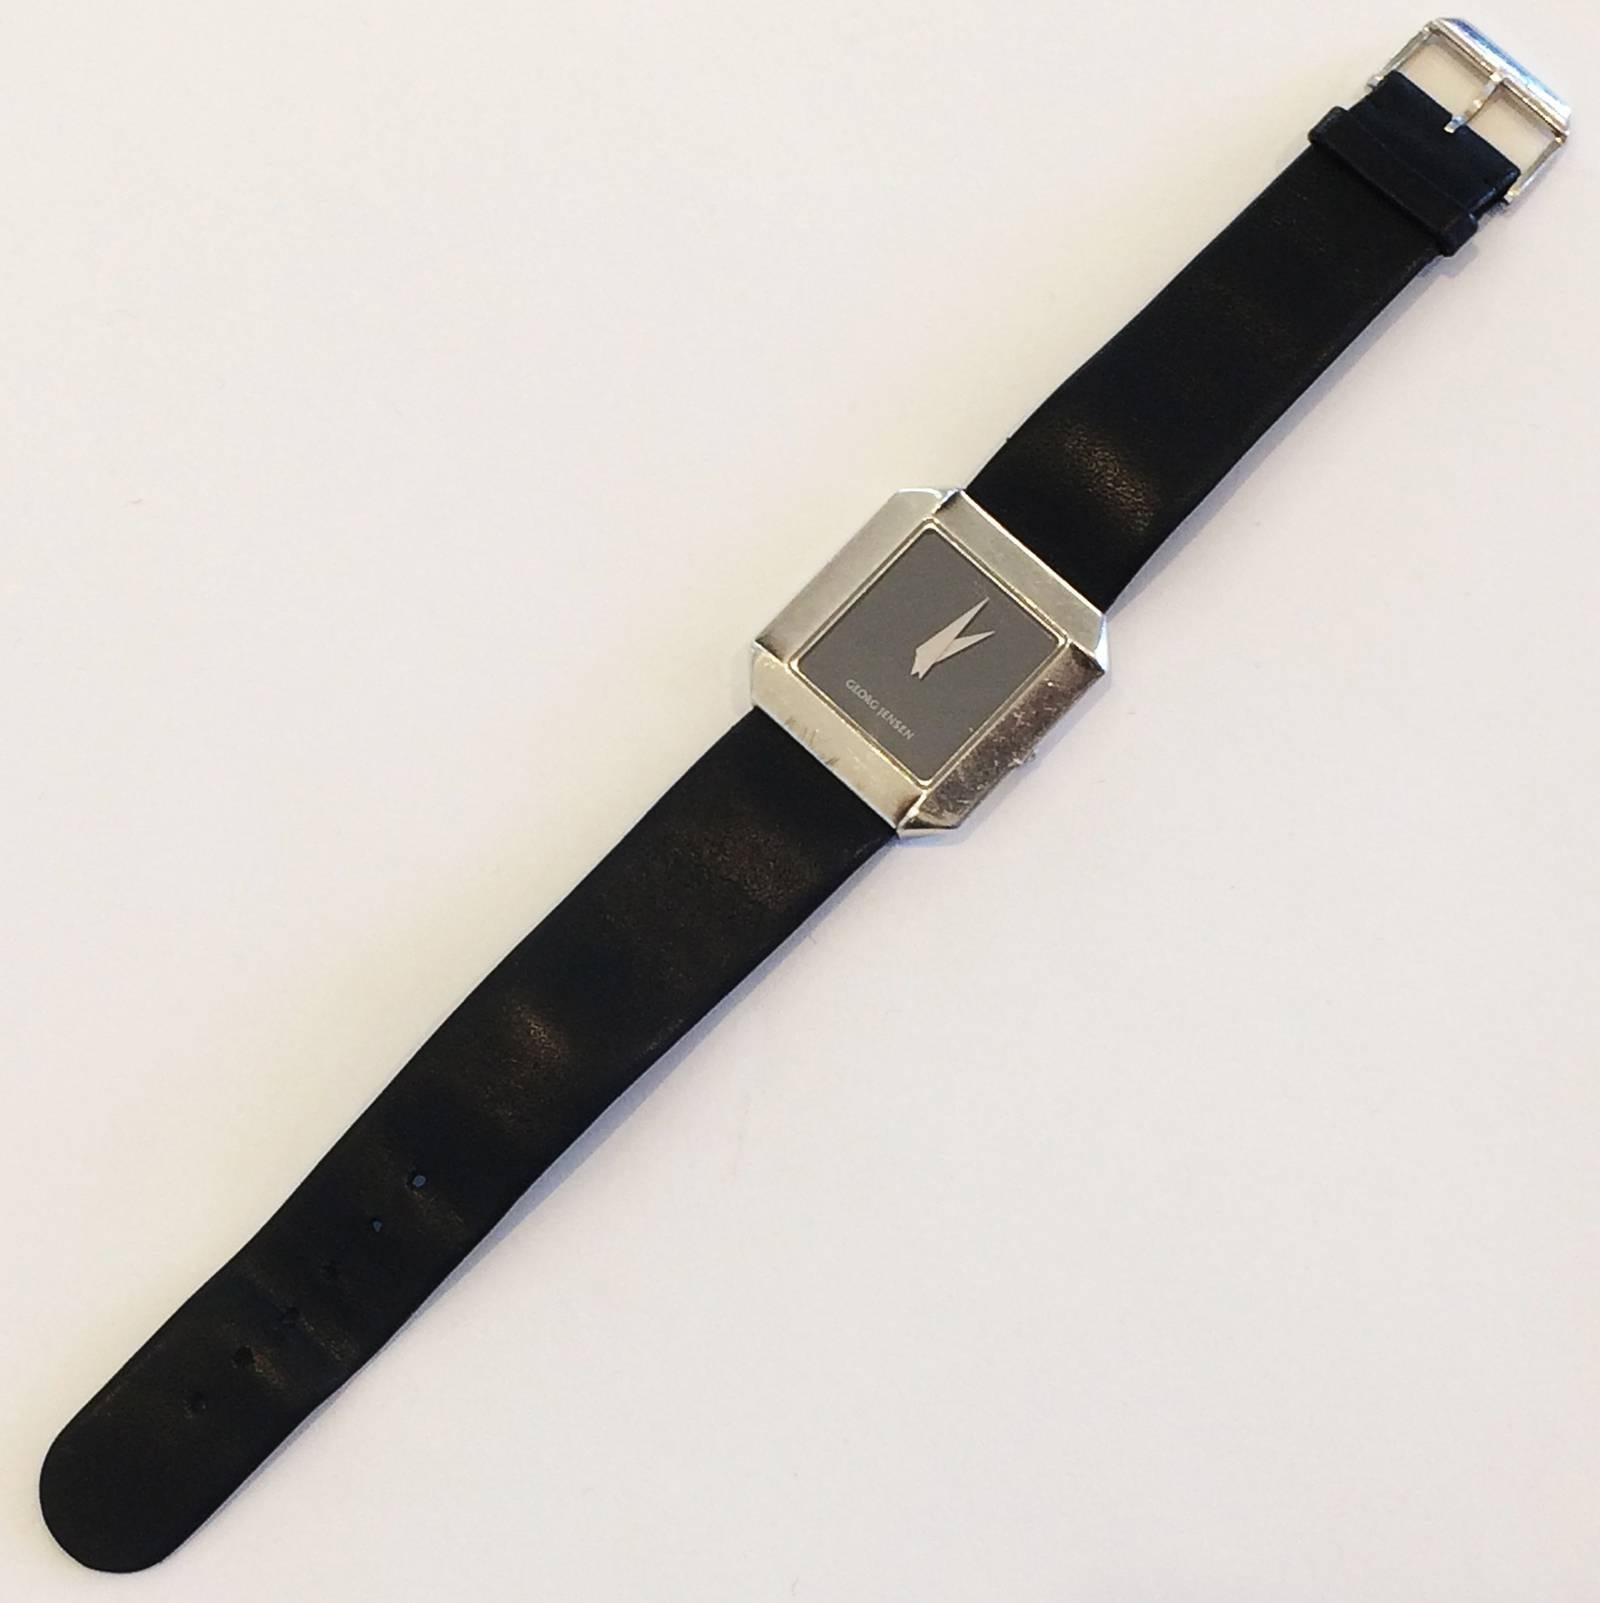 Georg Jensen Slim, Unisex Watch with an Octagonal, Geometric Sterling Silver Case, the Bezel is chamfered and stepped at each corner, black face and having the original Soft Jensen black Leather band with Sterling Silver Clasp. Elegance in its